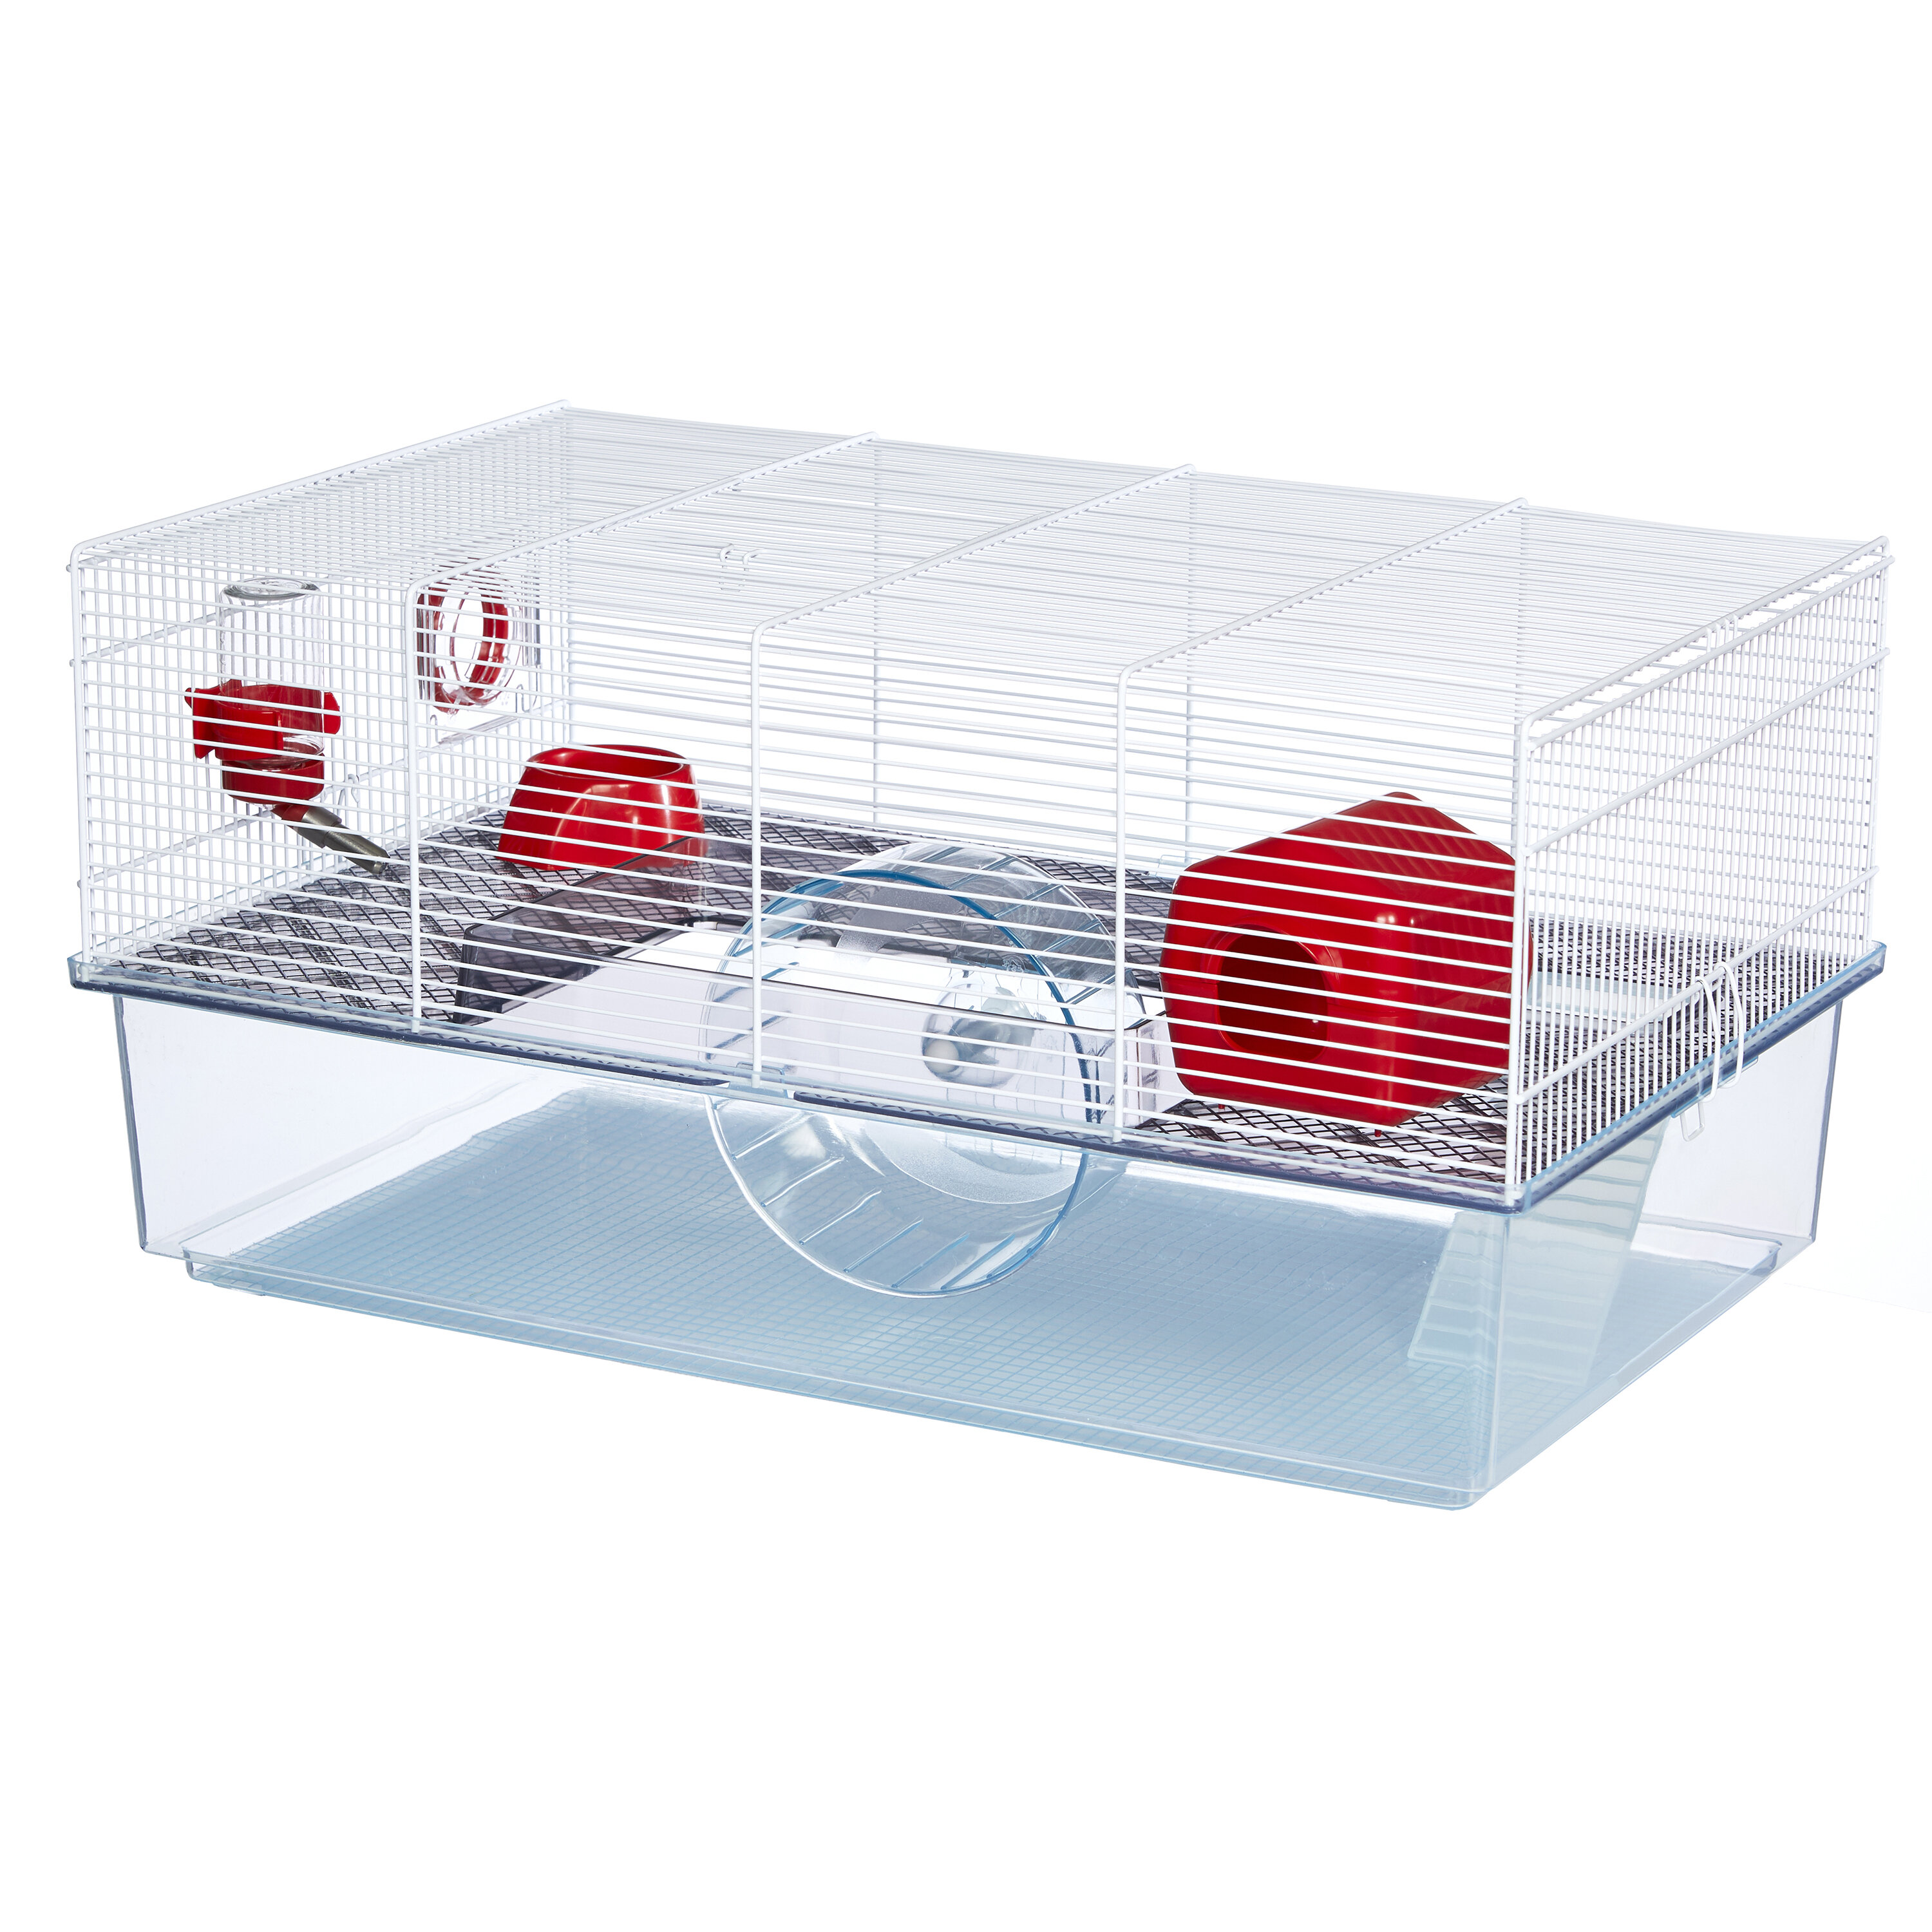 Hornsey Small Animal Portable Cage with Ramp